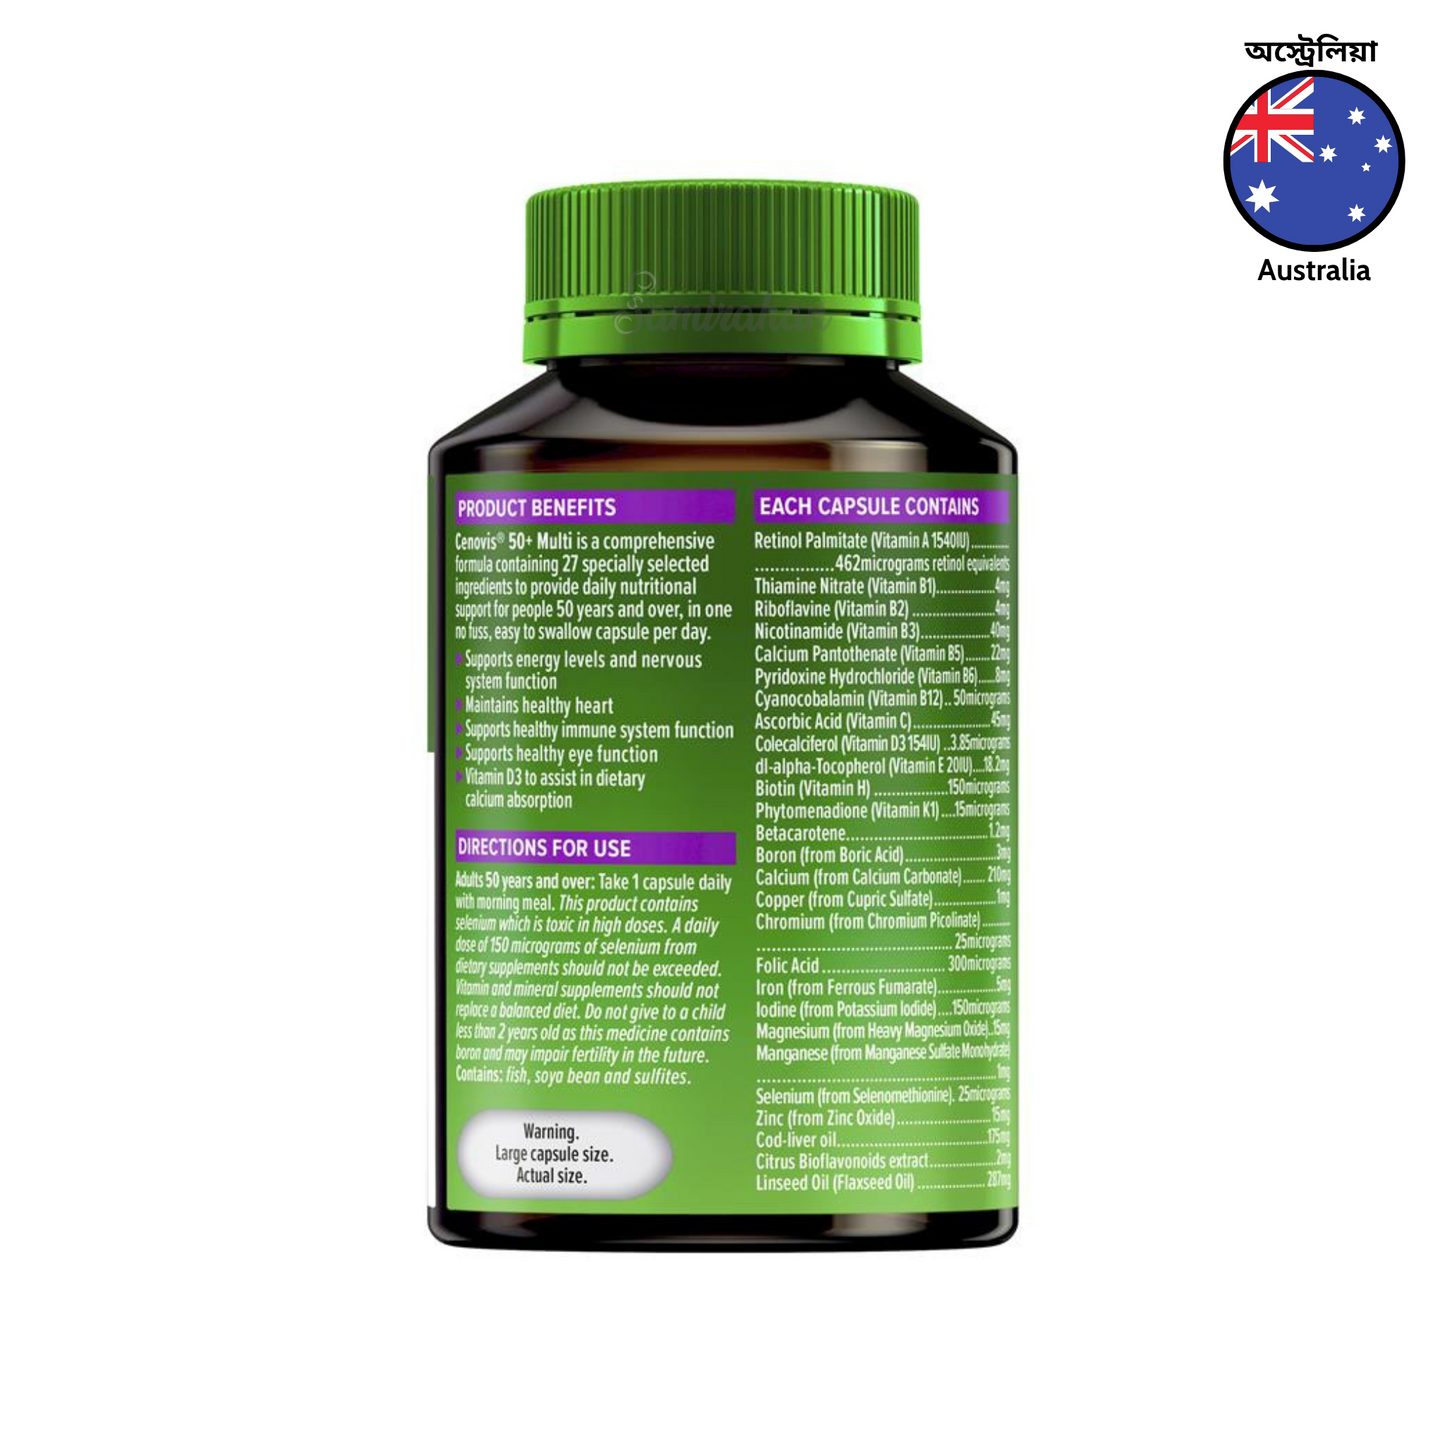 Cenovis 50+ is a comprehensive multivitamin supplement made of 27 special ingredients to provide daily nutritional support for males / females over 50 years old. Best genuine authentic real Australian foreign imported premium quality halal healthy food multi vitamin minerals lifestyle cheap price in Dhaka Bangladesh.